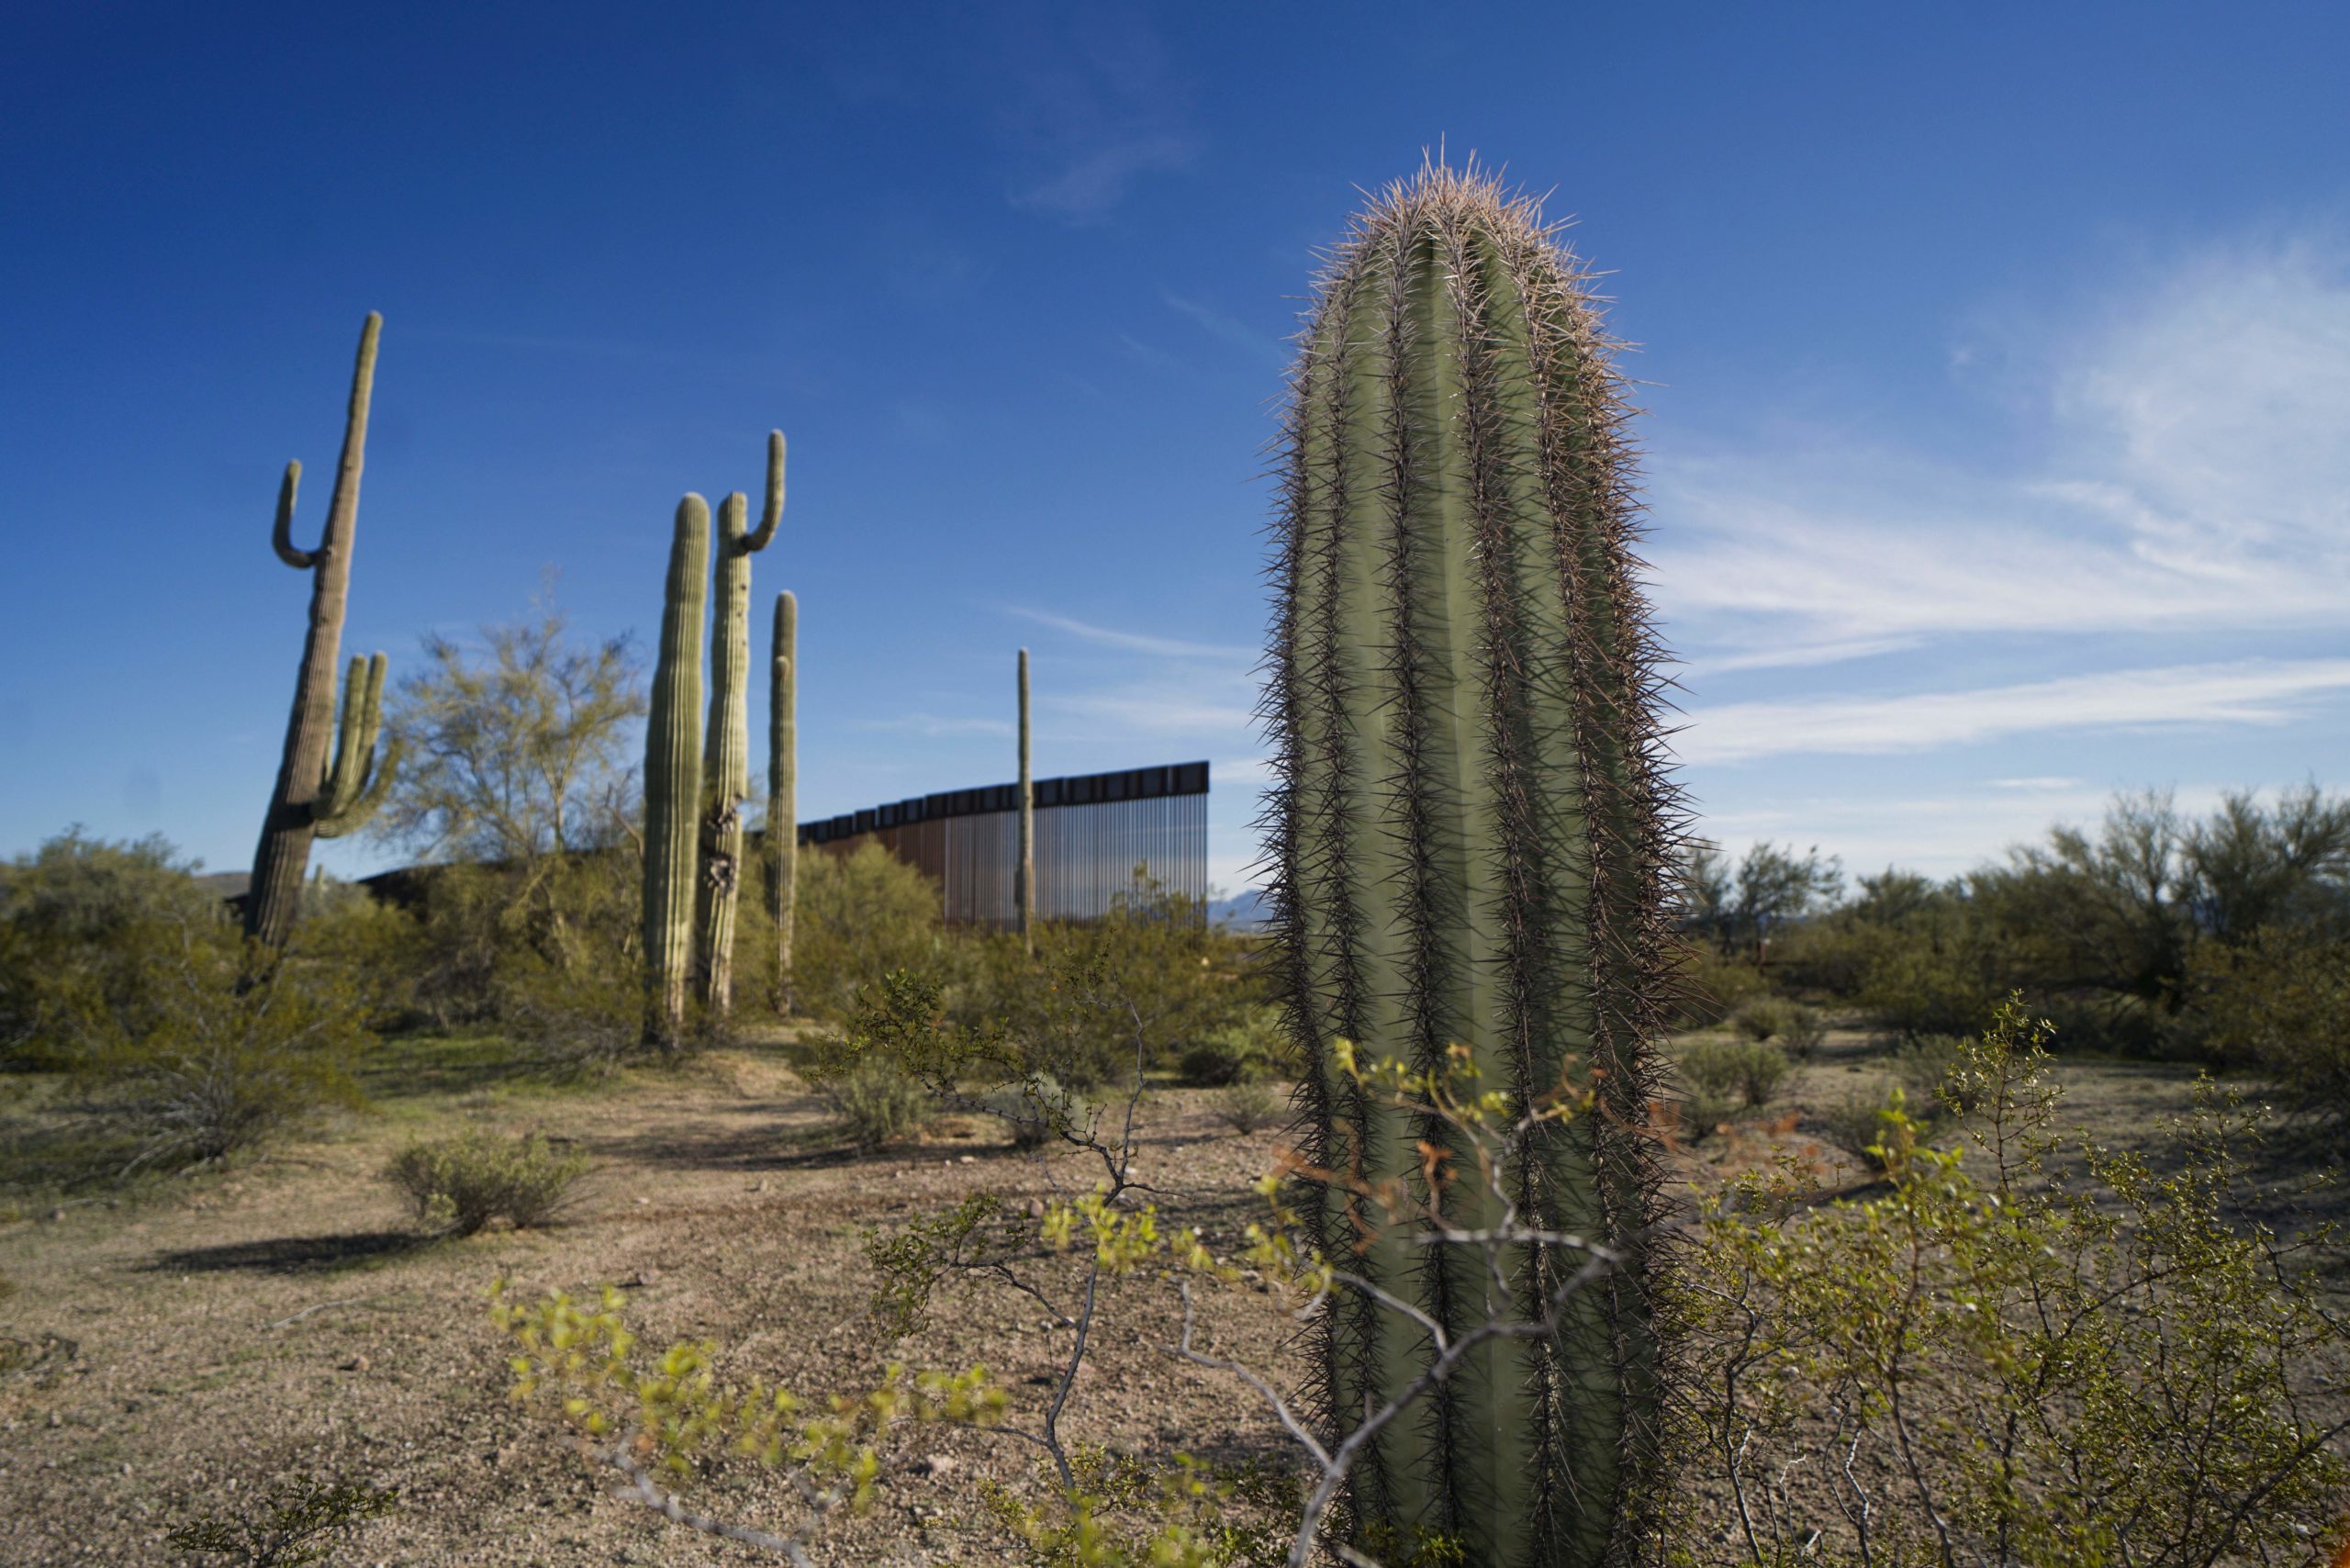 The United States-Mexico border wall is seen past cactuses in Organ Pipe National Park south of Ajo, Arizona, on February 13, 2020. - Construction of US President Donald Trump's border wall in the area has destroyed many species including the Organ Pipe Cactus. (Photo by SANDY HUFFAKER / AFP) (Photo by SANDY HUFFAKER/AFP via Getty Images)